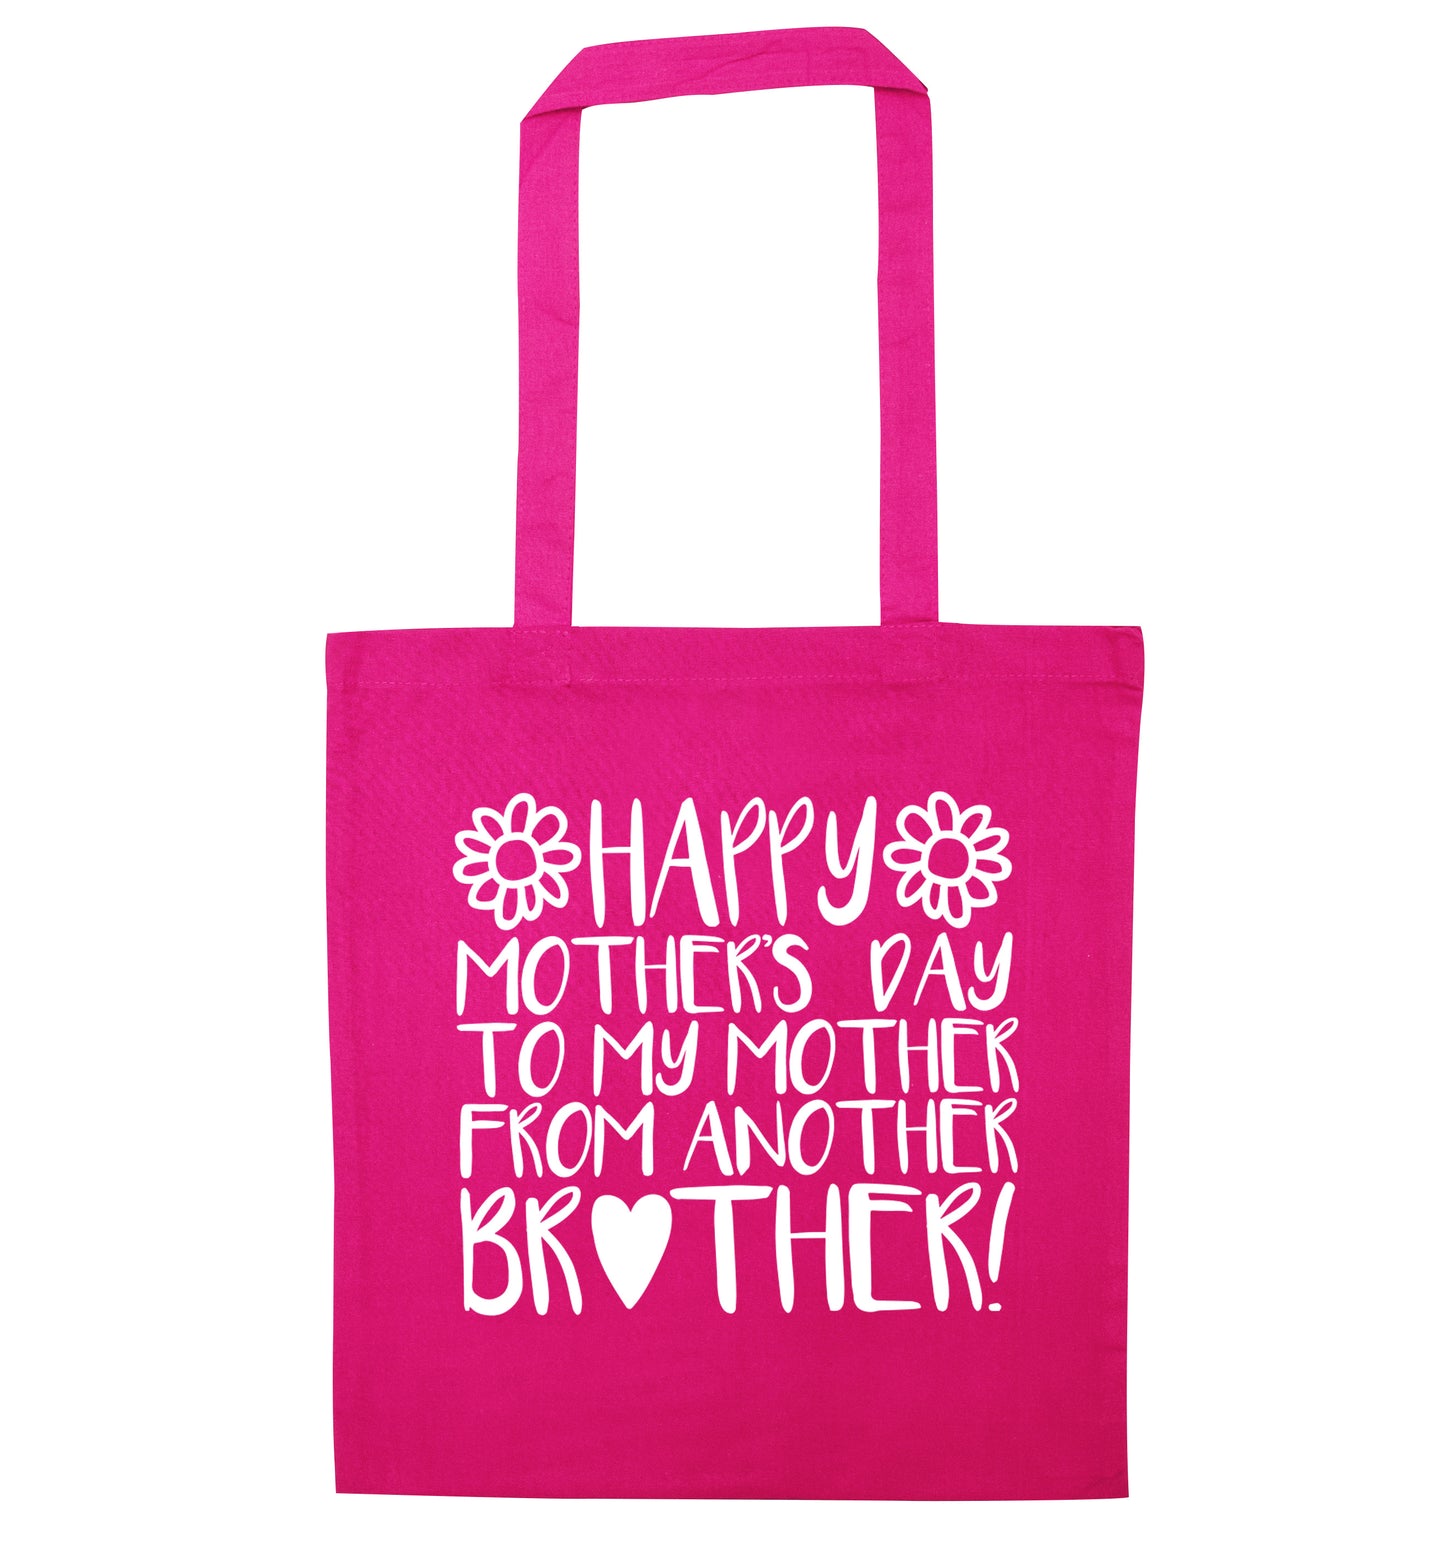 Happy mother's day to my mother from another brother pink tote bag